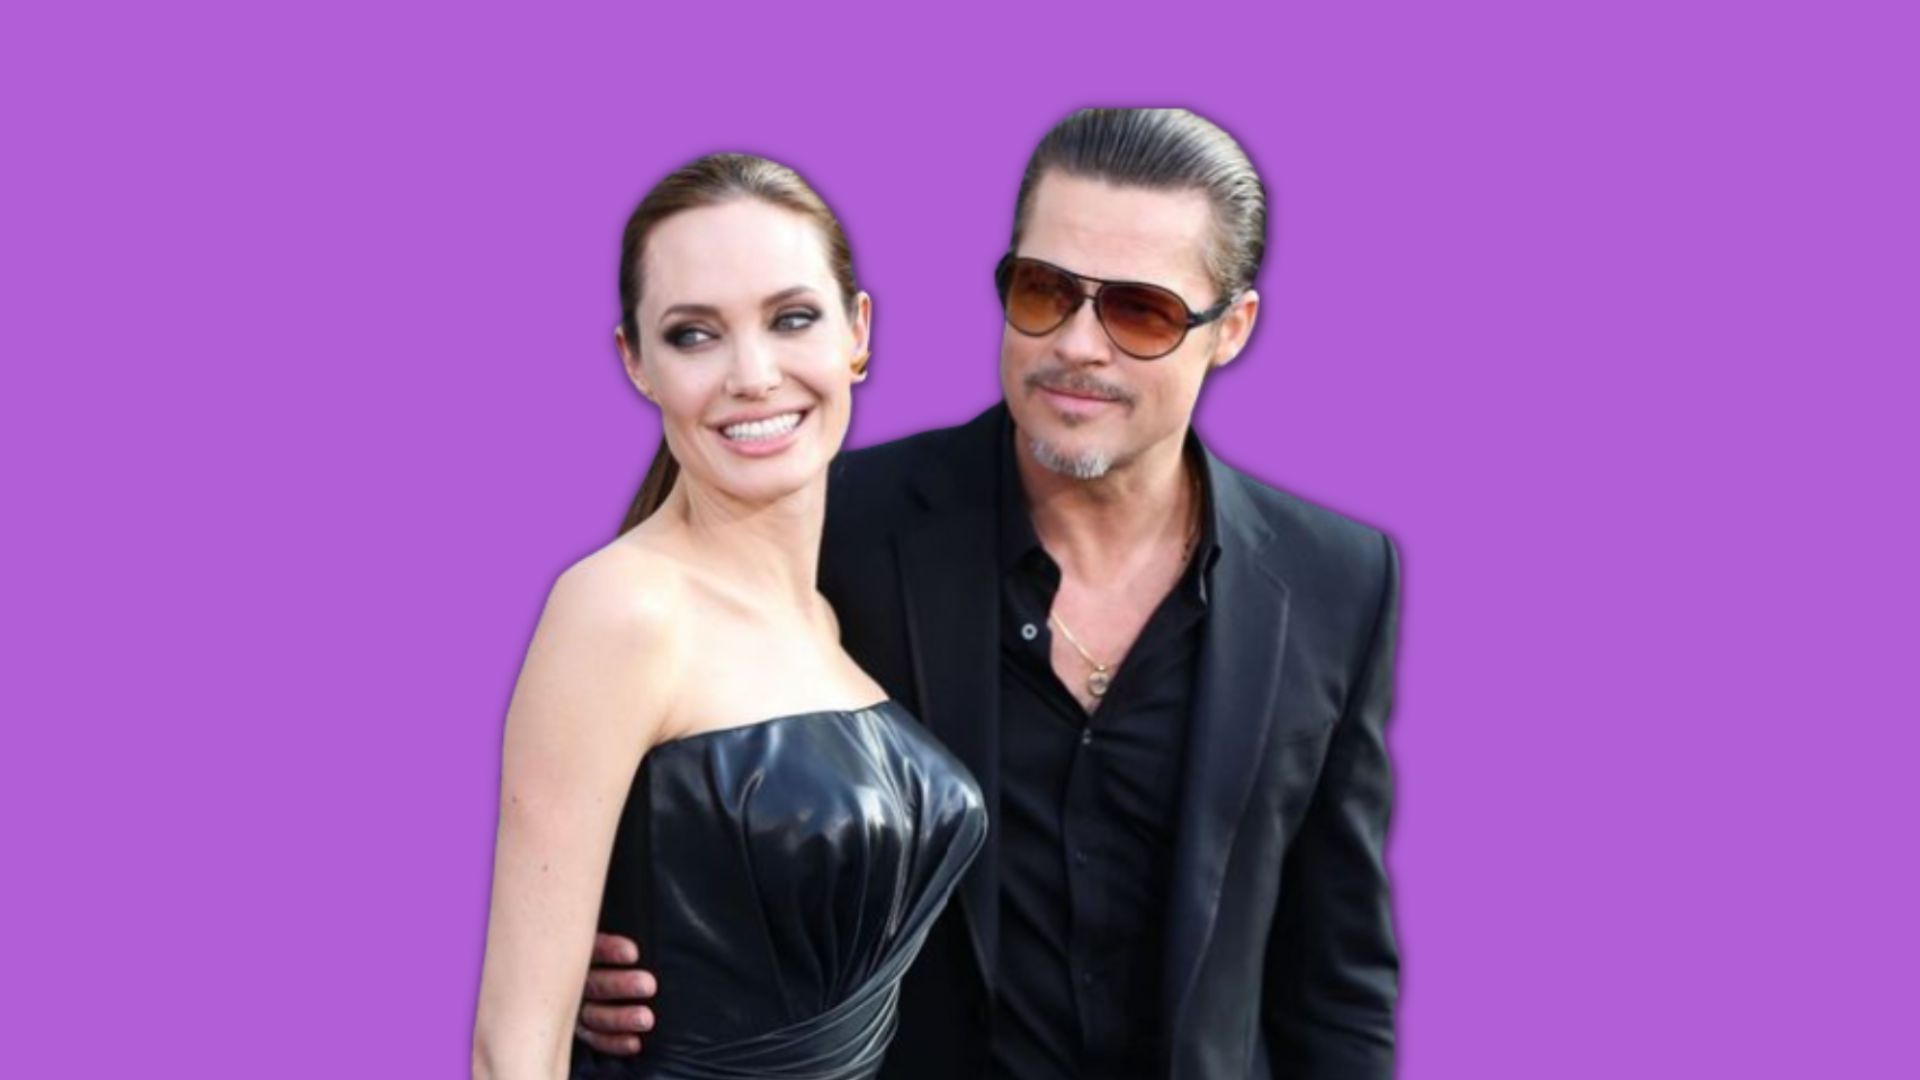 Angelina Jolie Reportedly Accused Brad Pitt Of “Grabbing Her By The Head”, Attempting To Attack Kid During 2016 Private Jet Fight